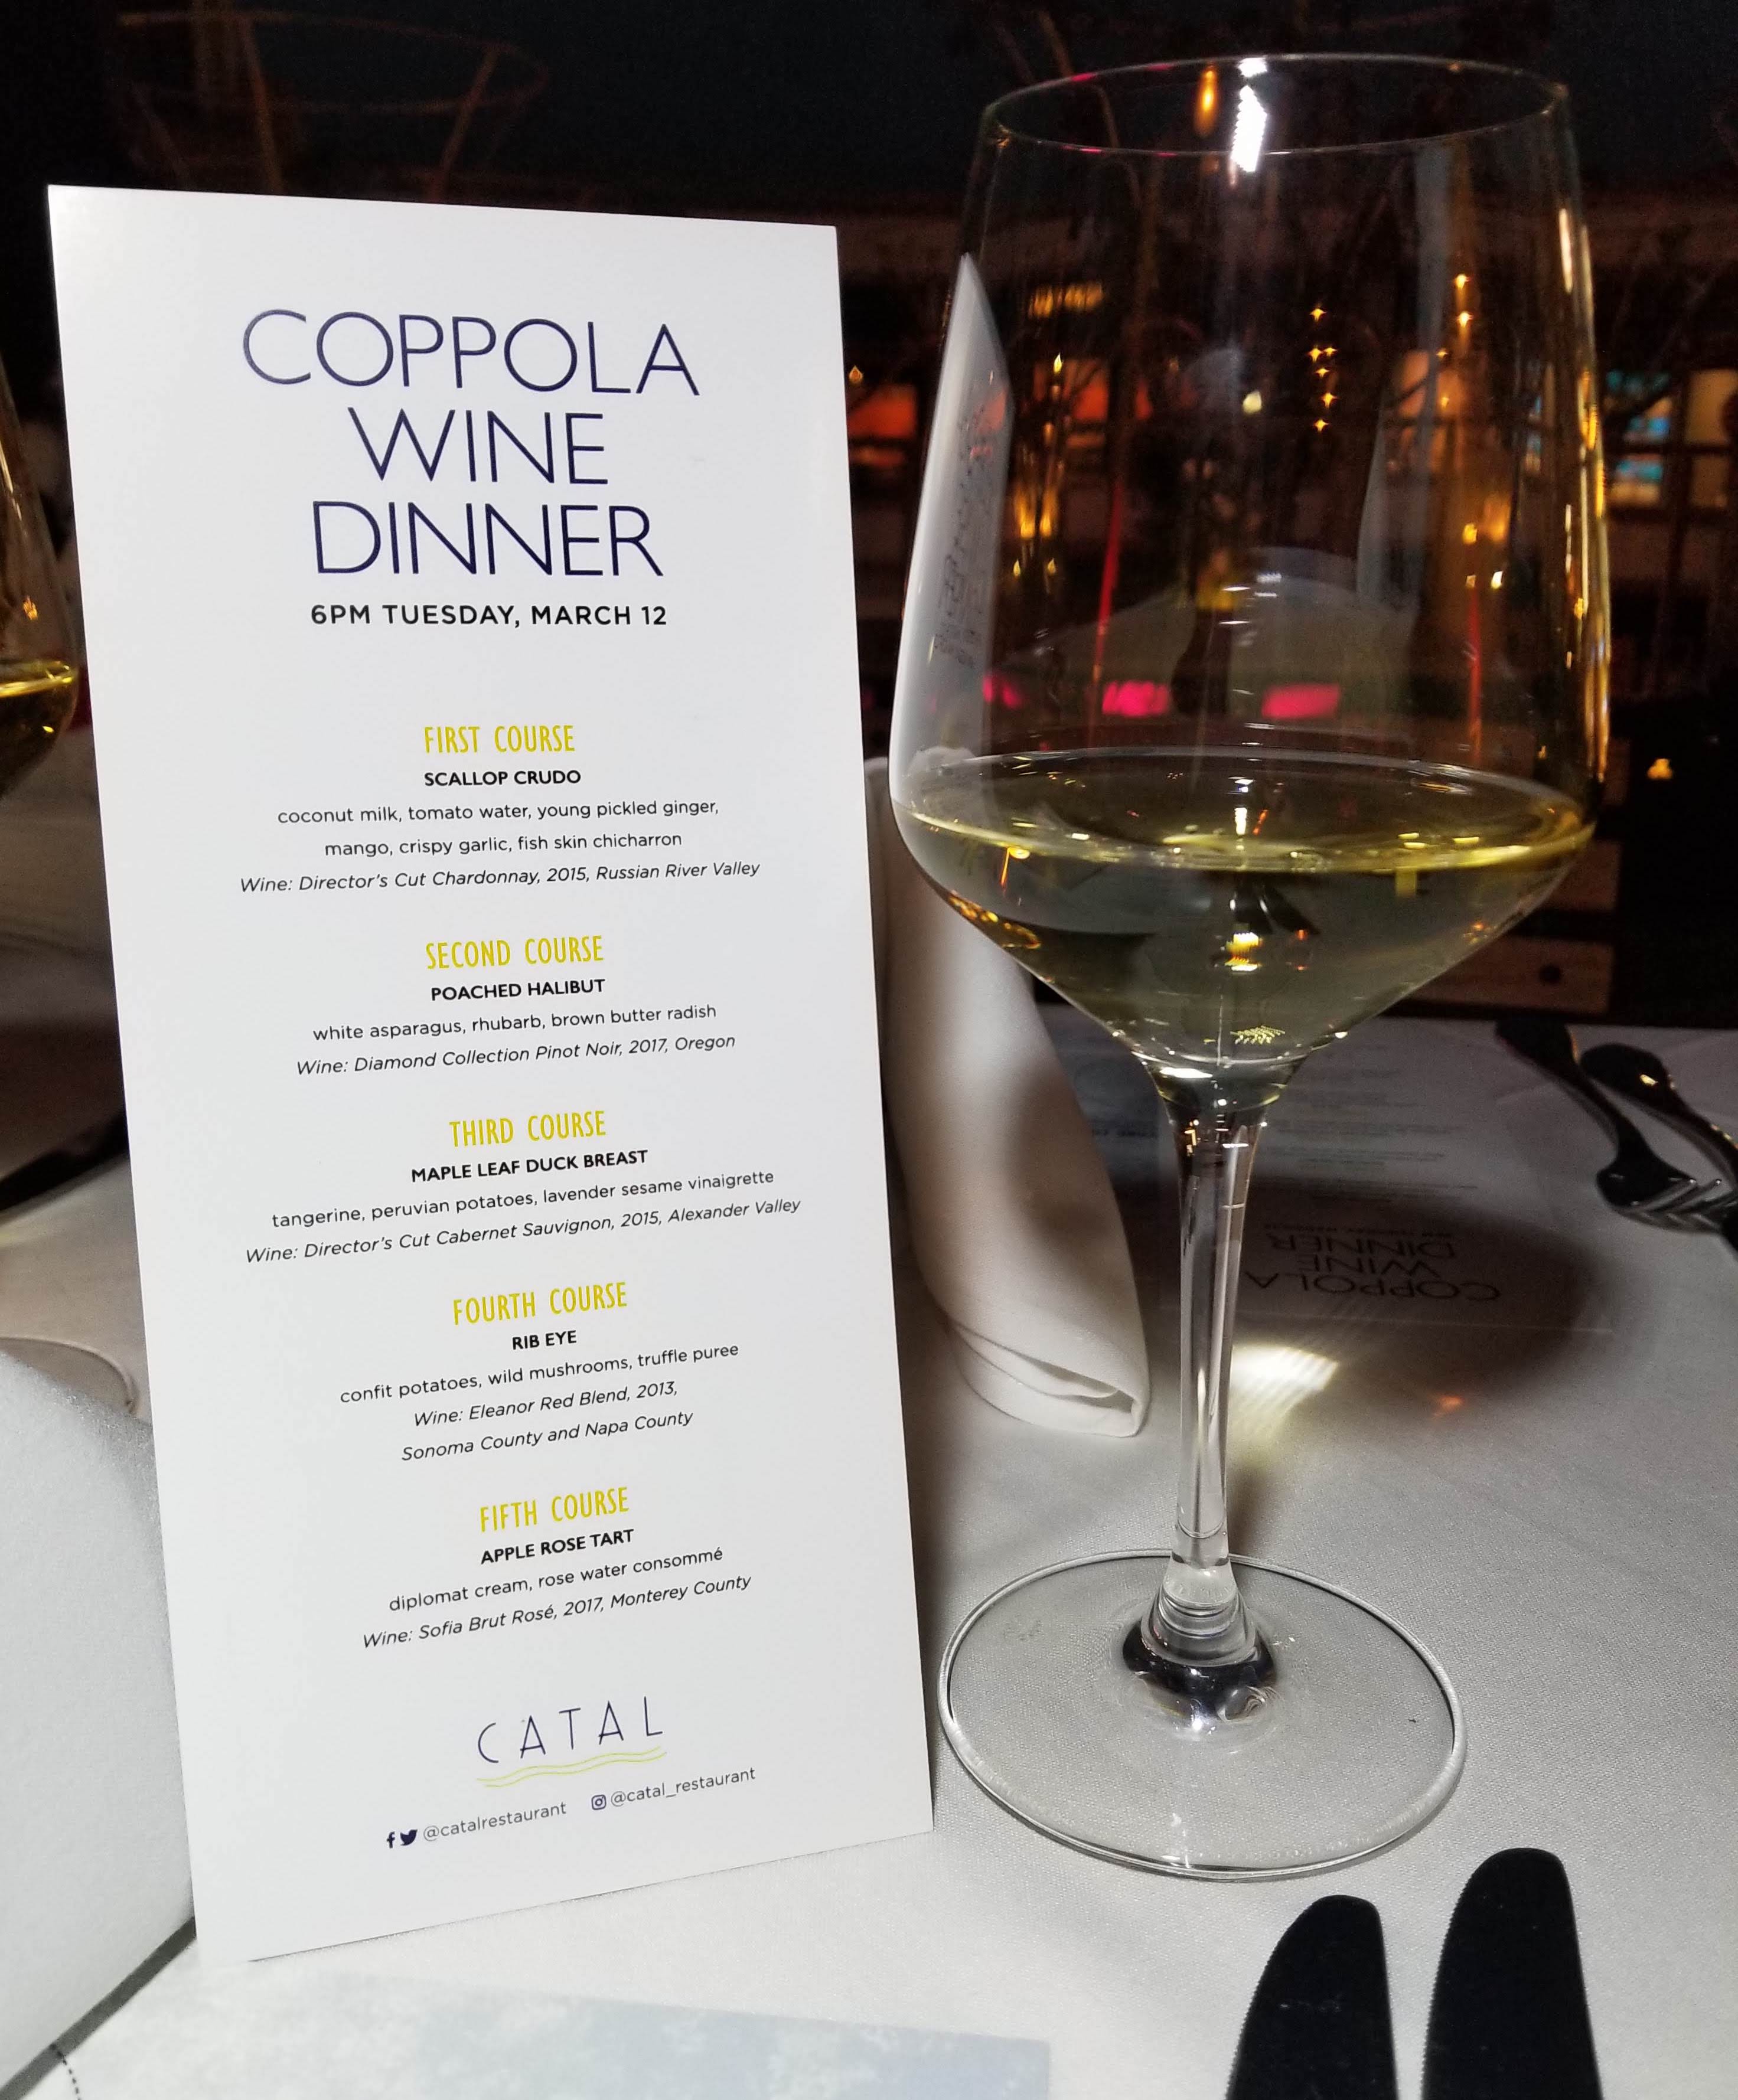 If you love good food and good wine you will want to attend this special night on March 12th at 6pm at Catal! I had the opportunity to preview Catal Restaurant's Five-Course Coppola Wine Dinner in Downtown Disney the other night. Catal Restaurant is featuring five special dishes & five Coppola Wines.